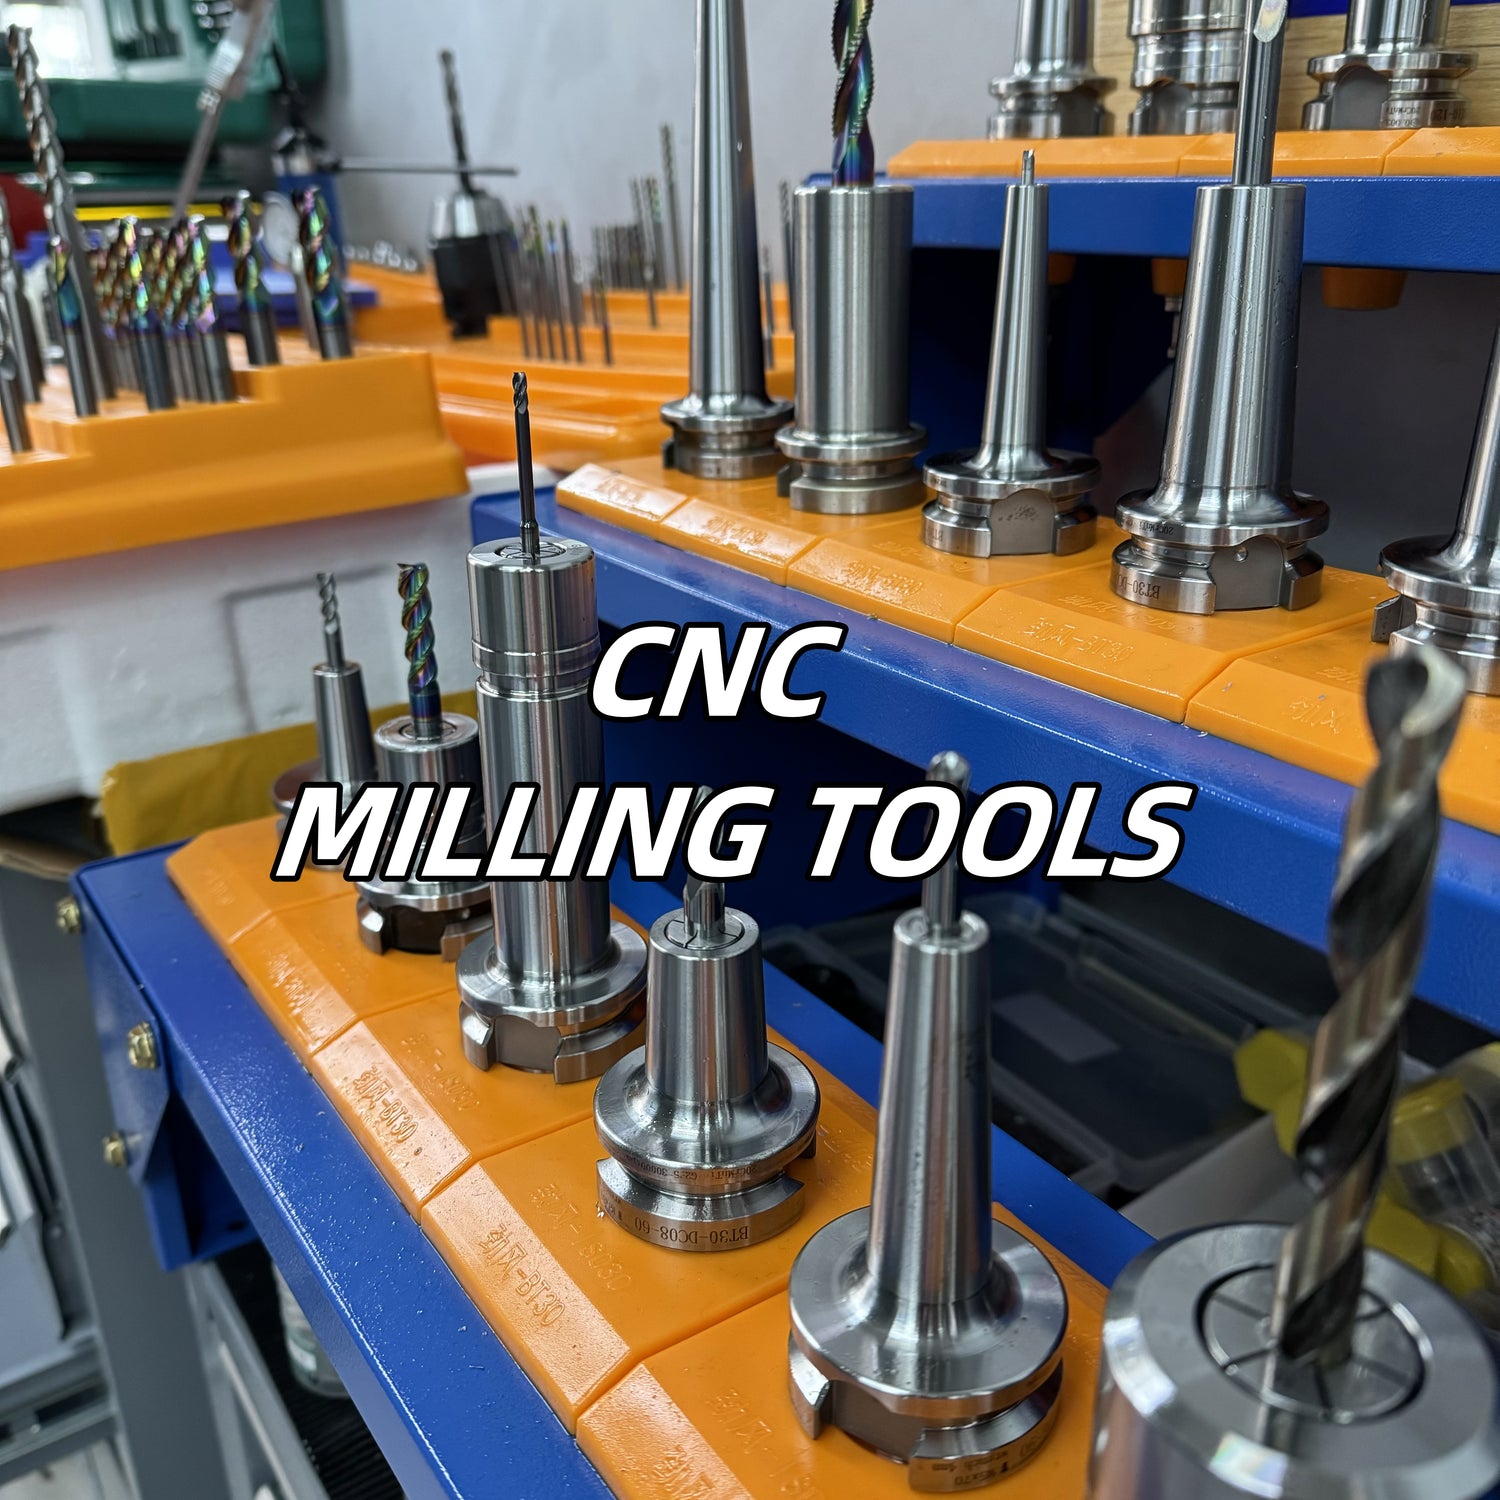 Our CNC milling tools. 🔨